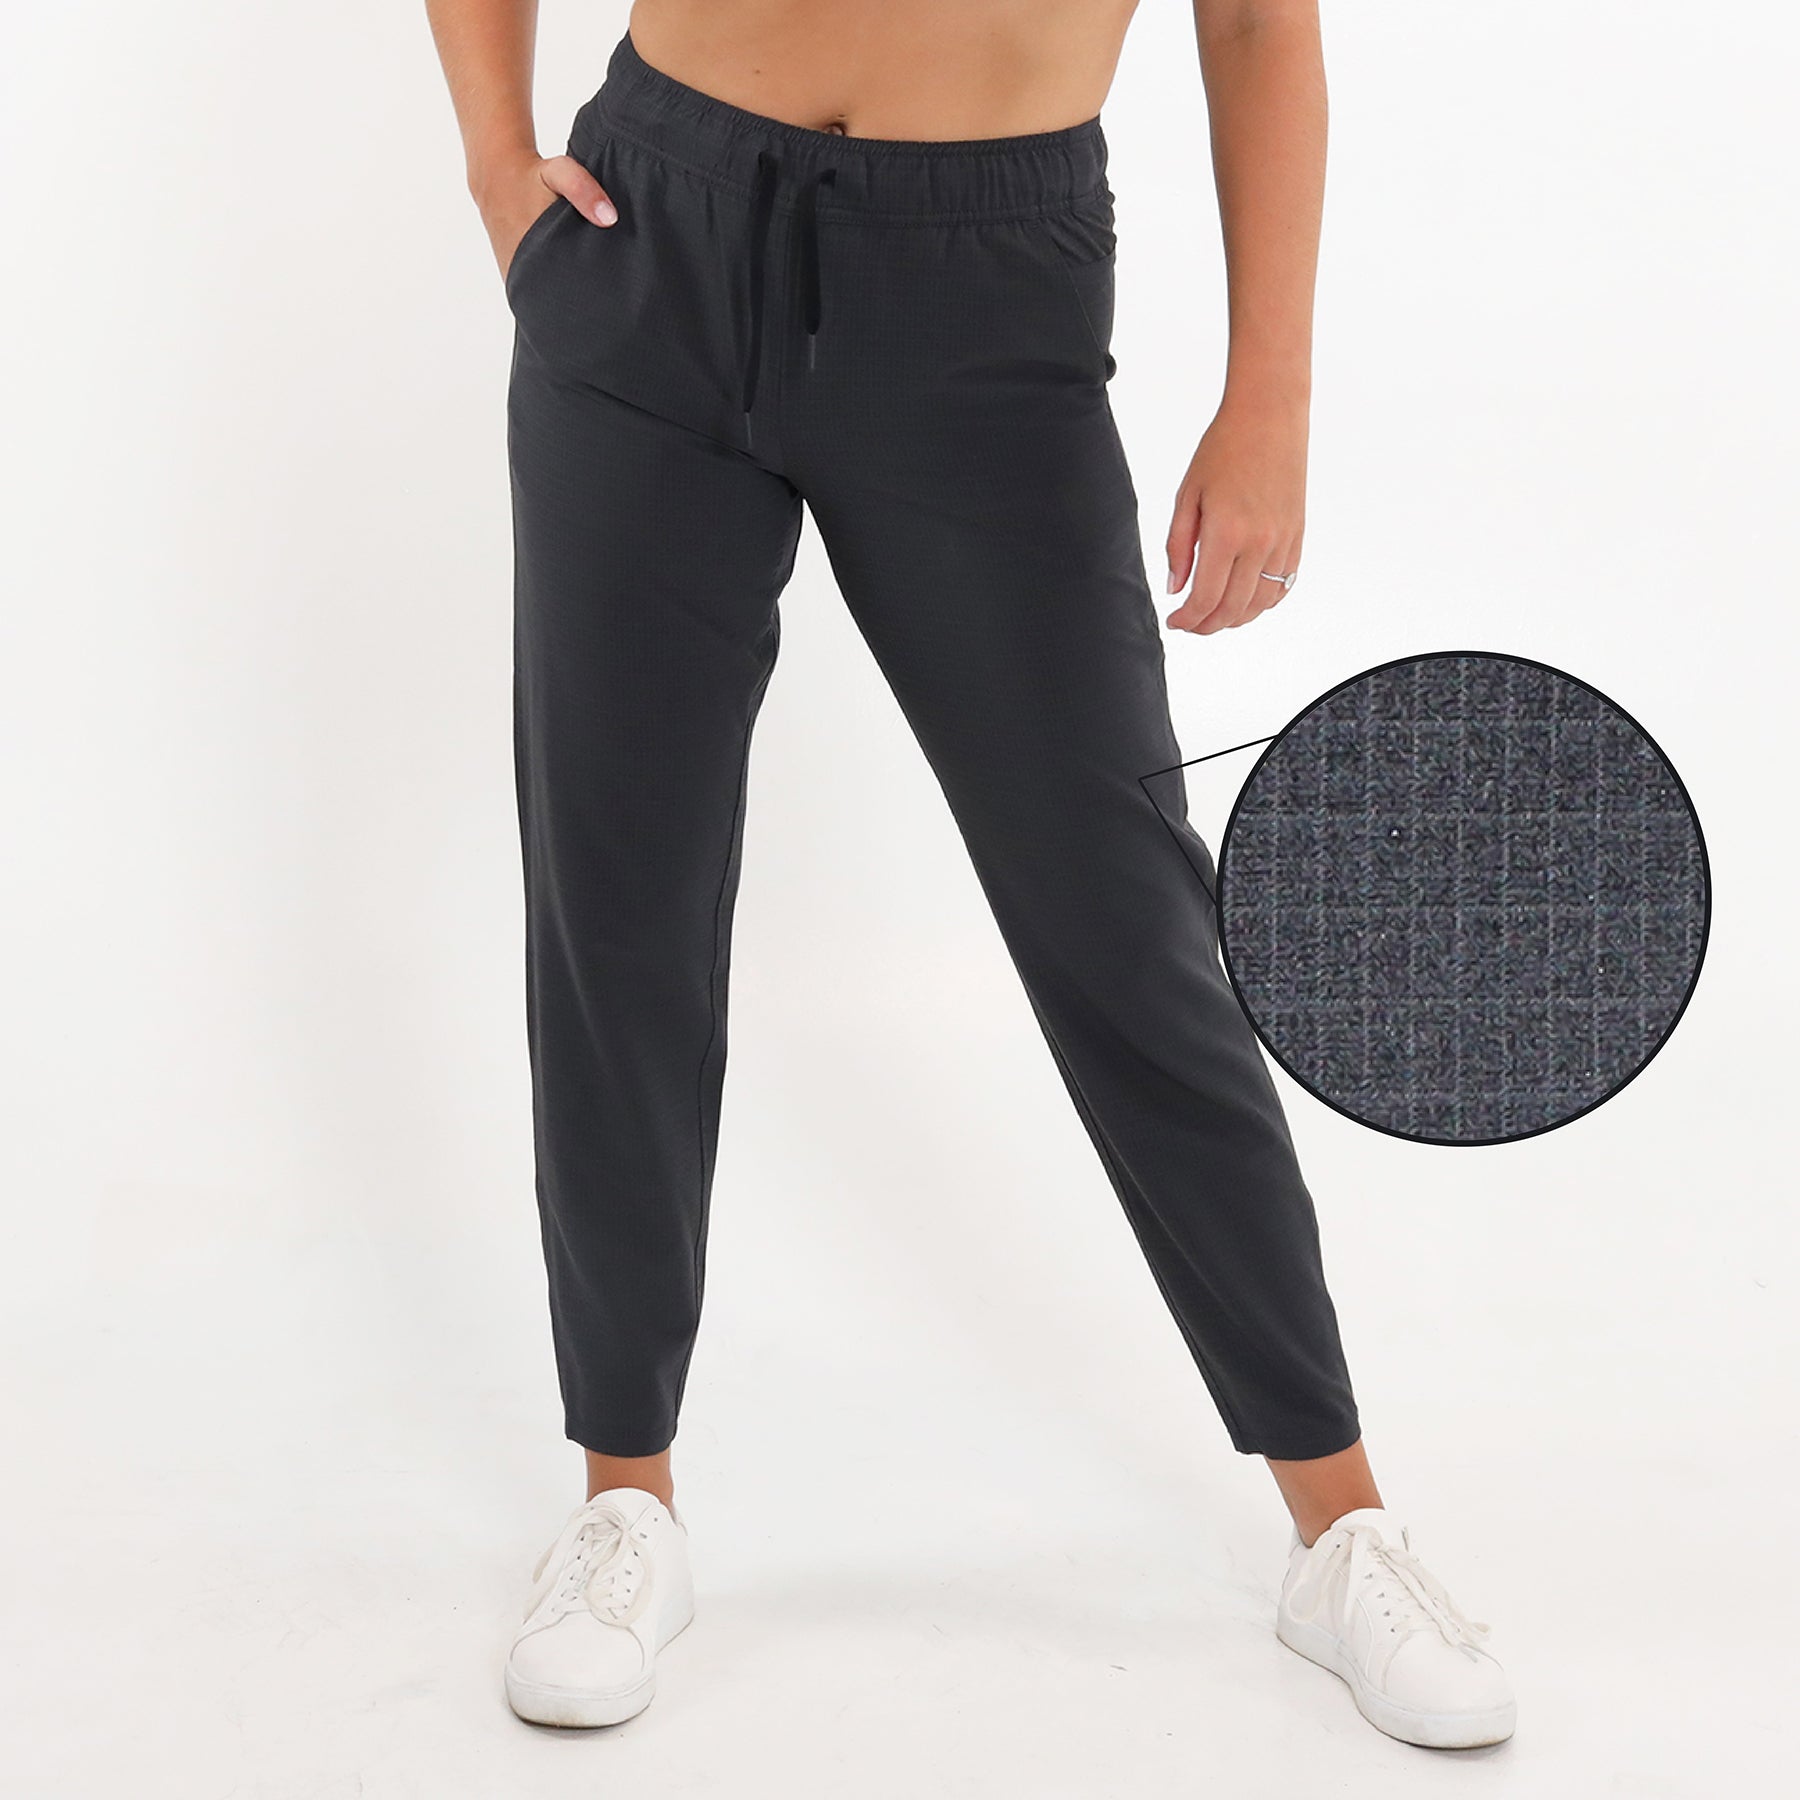 LADIES SOLUTION JOGGER - NAVY HEATHER – AndersonOrd Performance Apparel